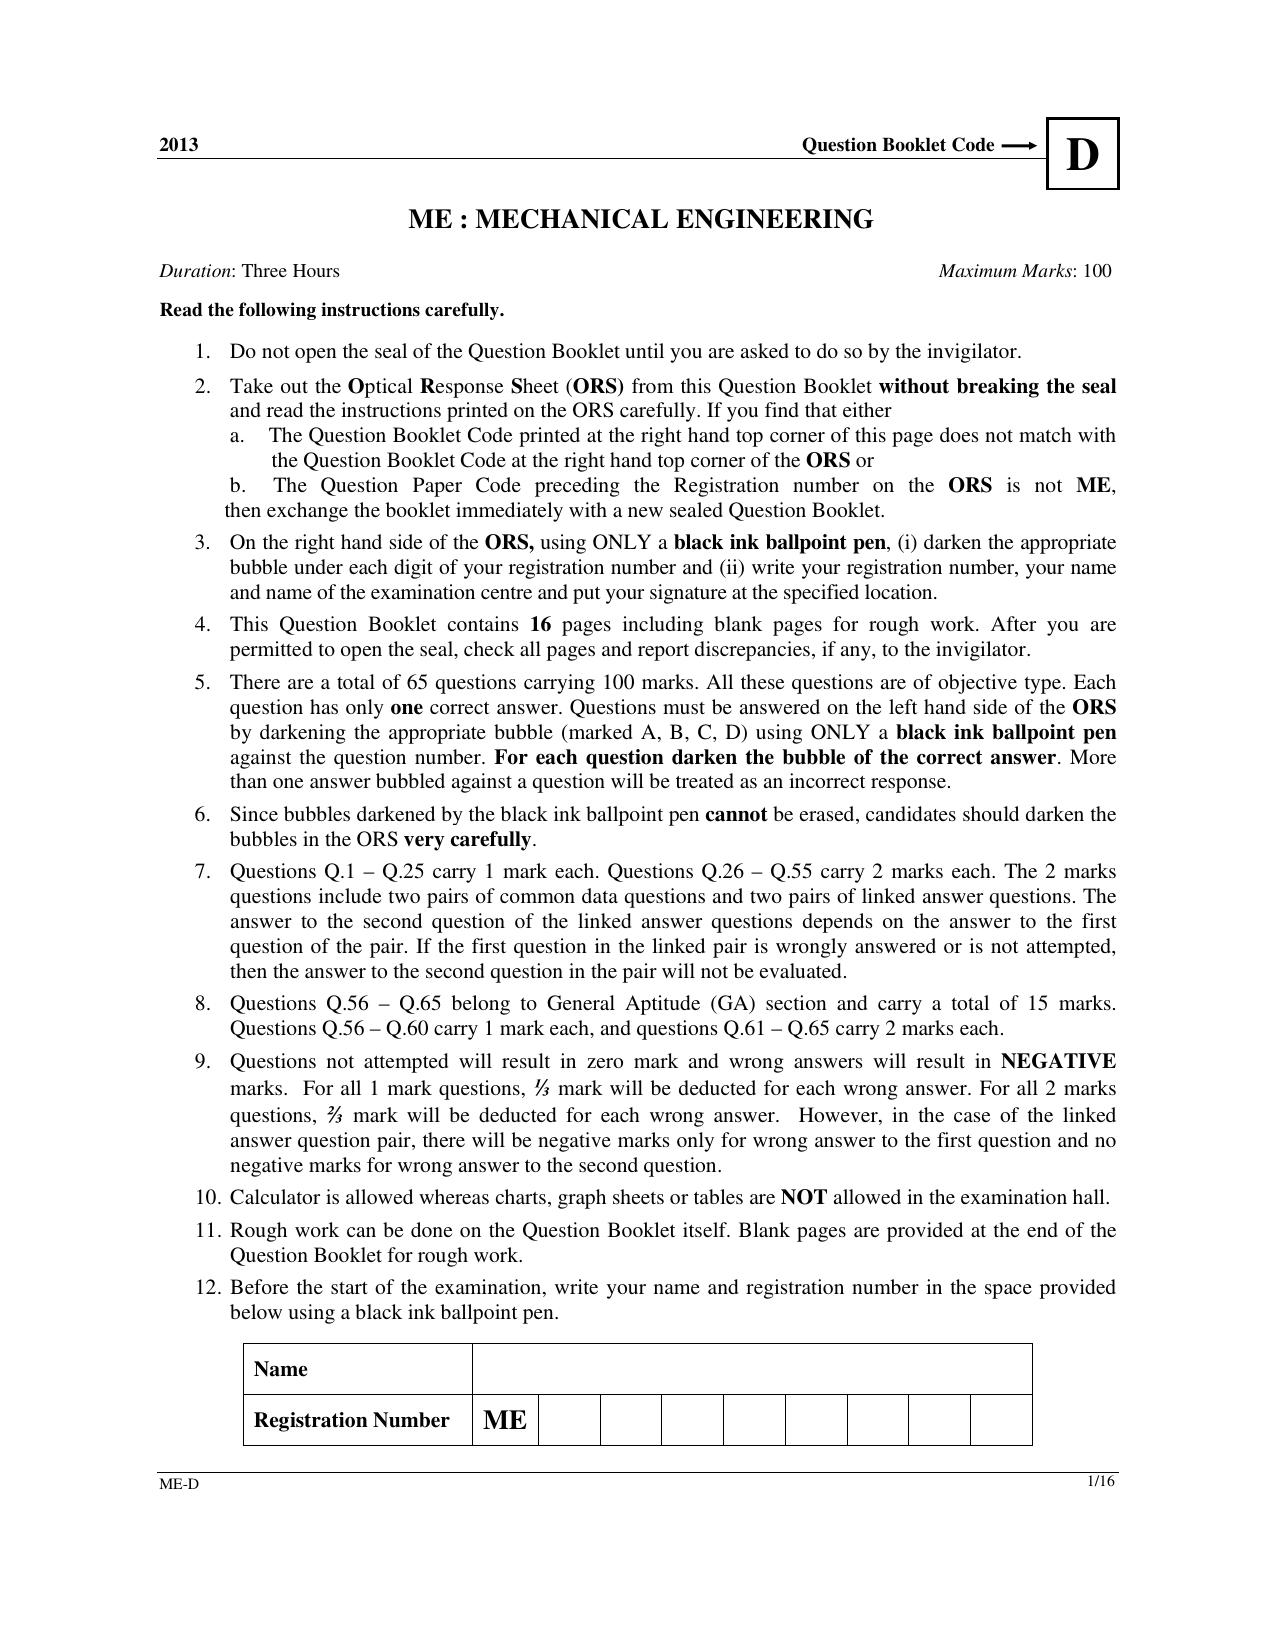 GATE 2013 Mechanical Engineering (ME) Question Paper with Answer Key - Page 44